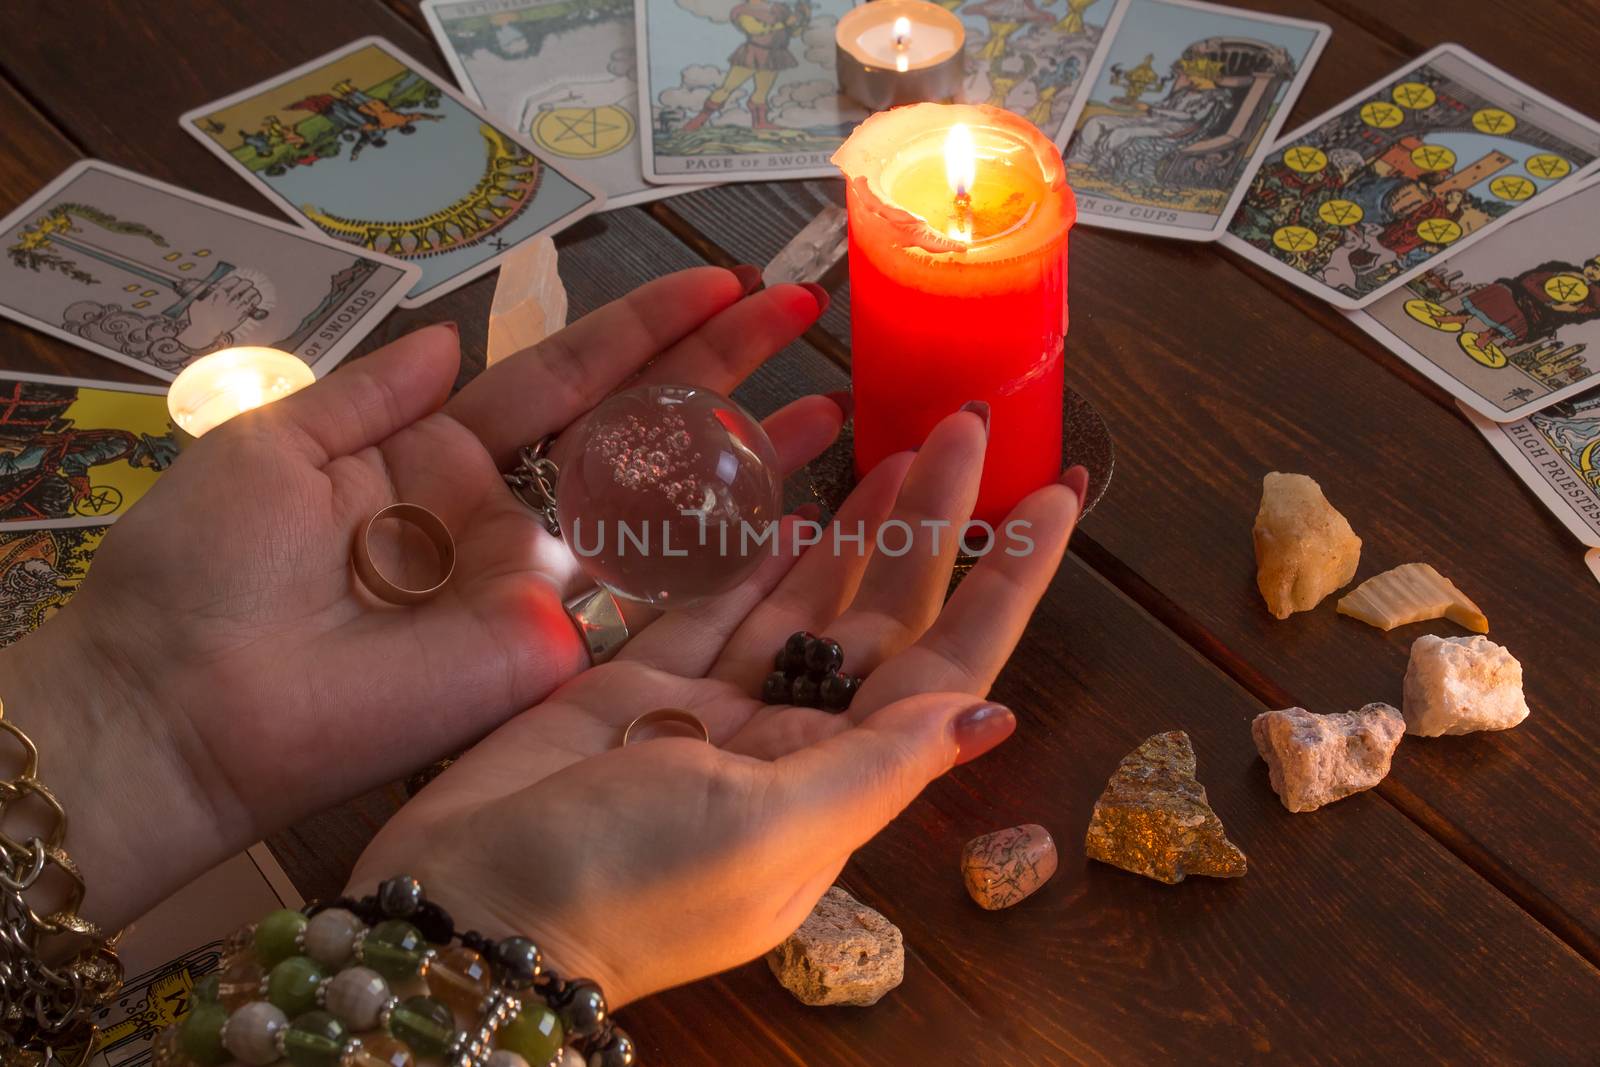 Bangkok,Thailand,March.15.20.The girl holds wedding rings on her hand with Tarot cards with heart,crystals,a magic ball and a lighted candle.Fortune telling for love, the rite of love spell.